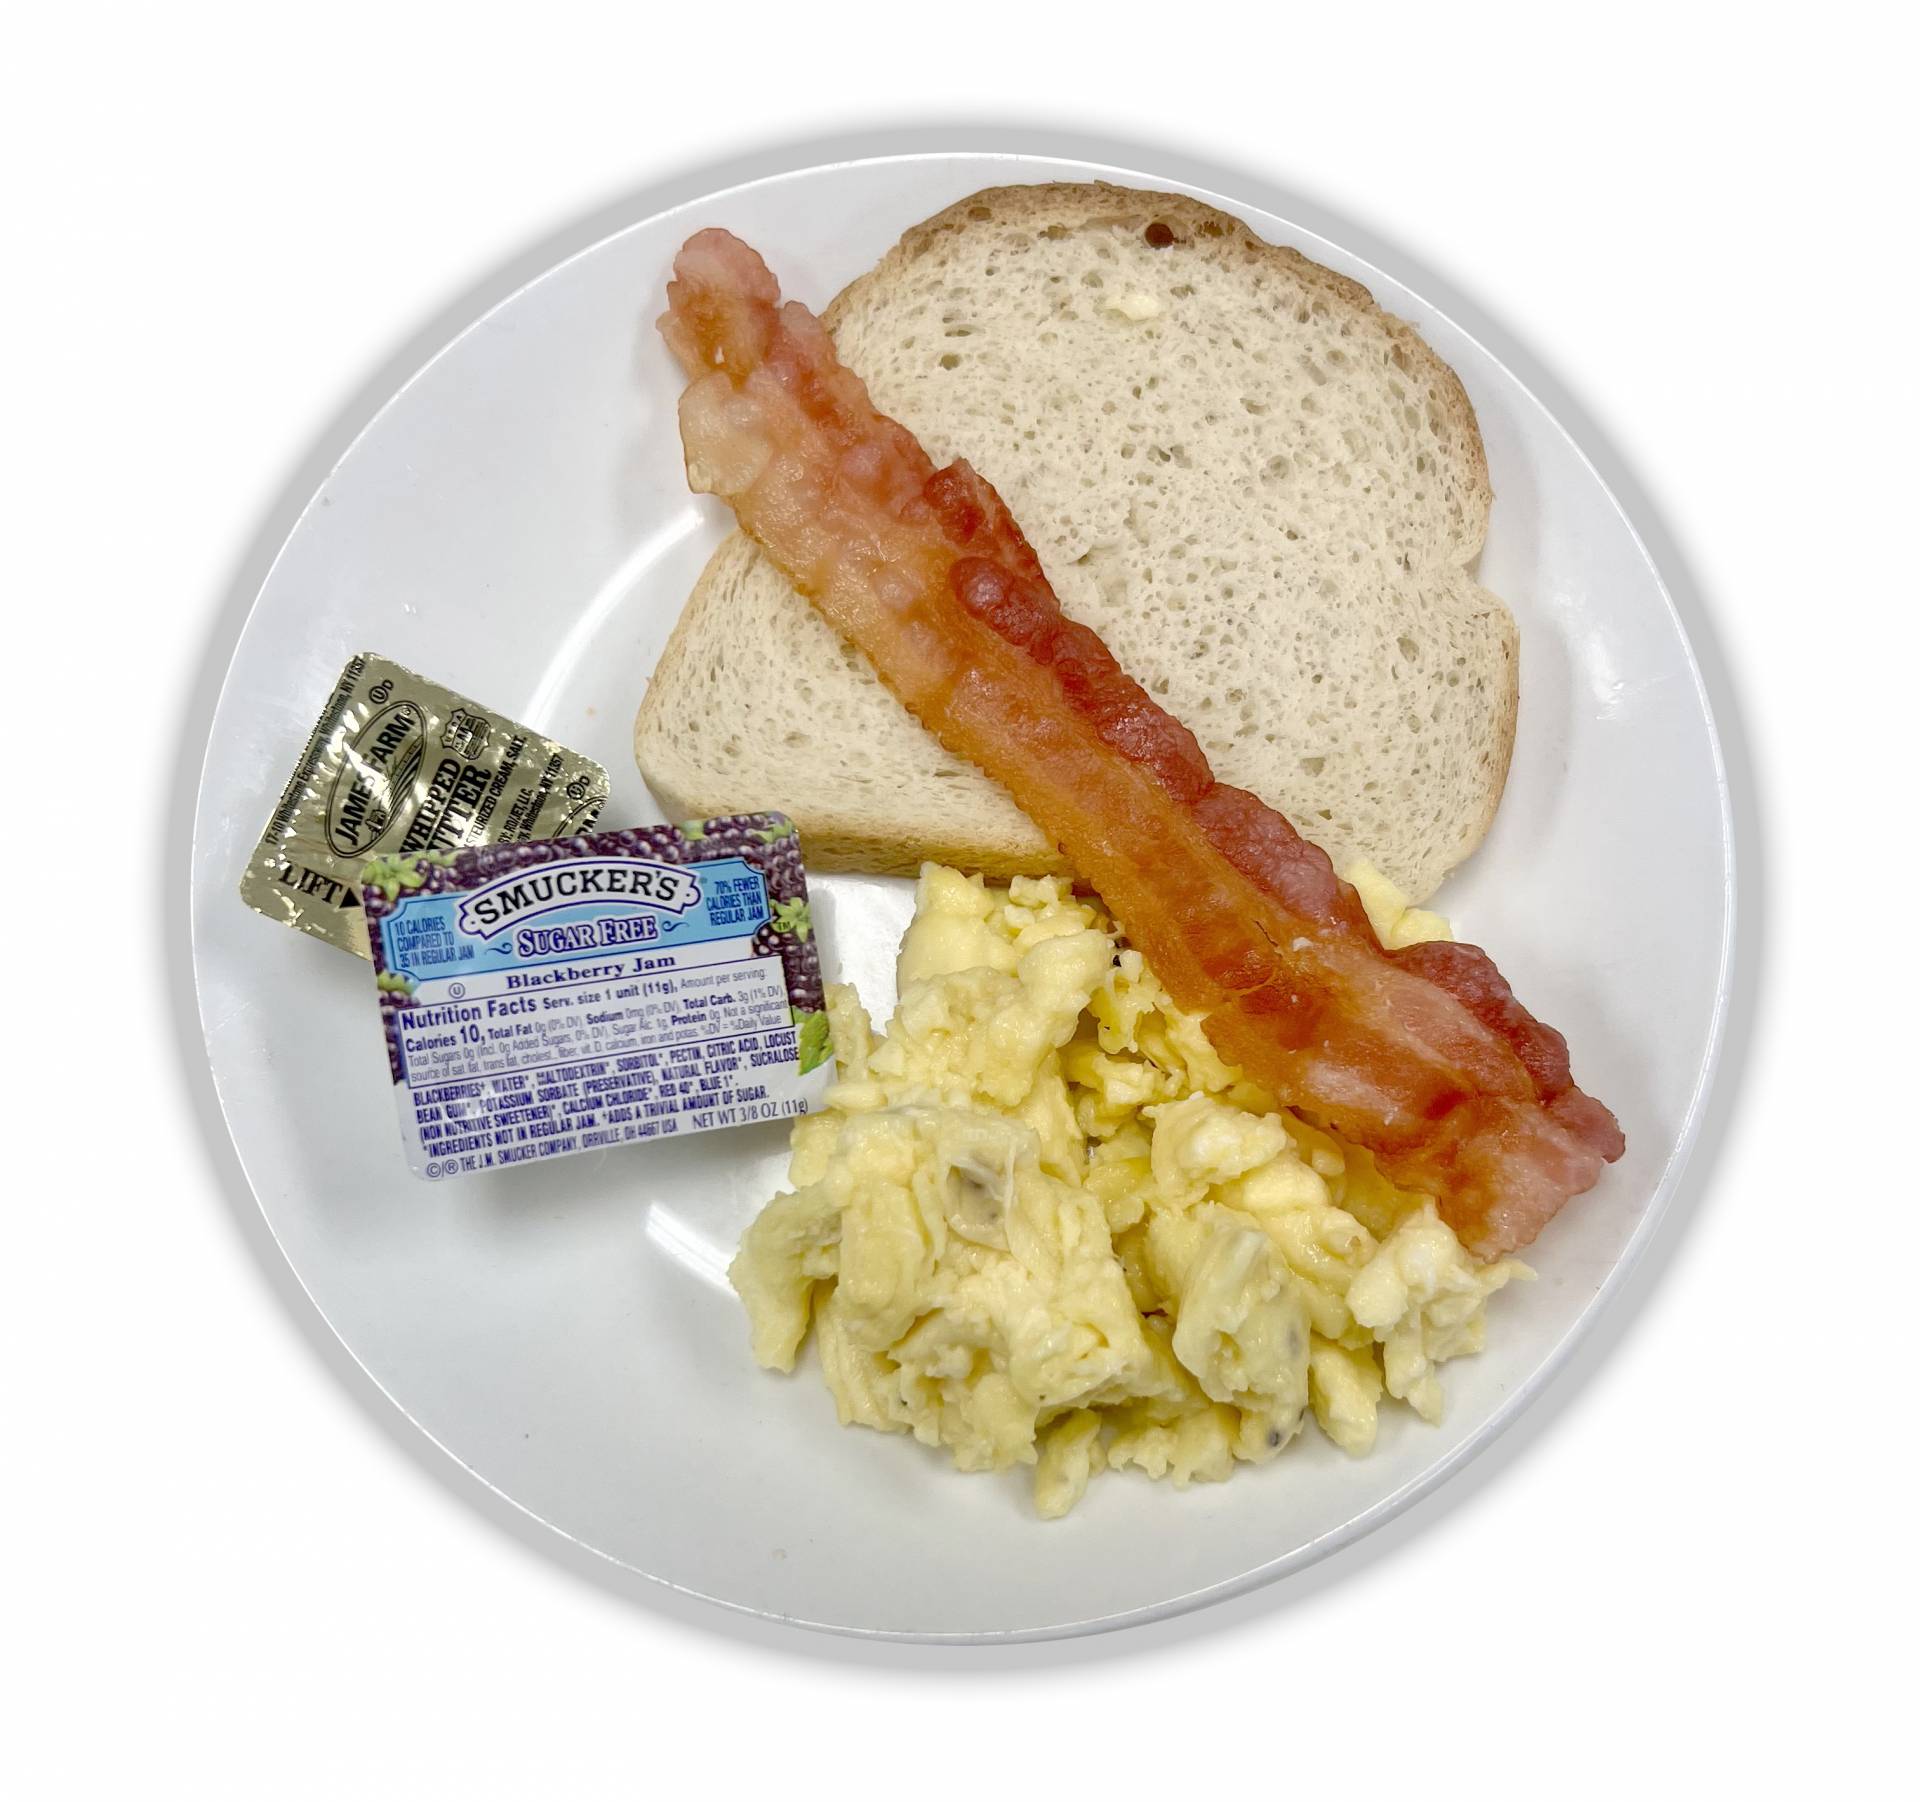 Scrambled Eggs with Toast, Sugar Free Jelly and Bacon